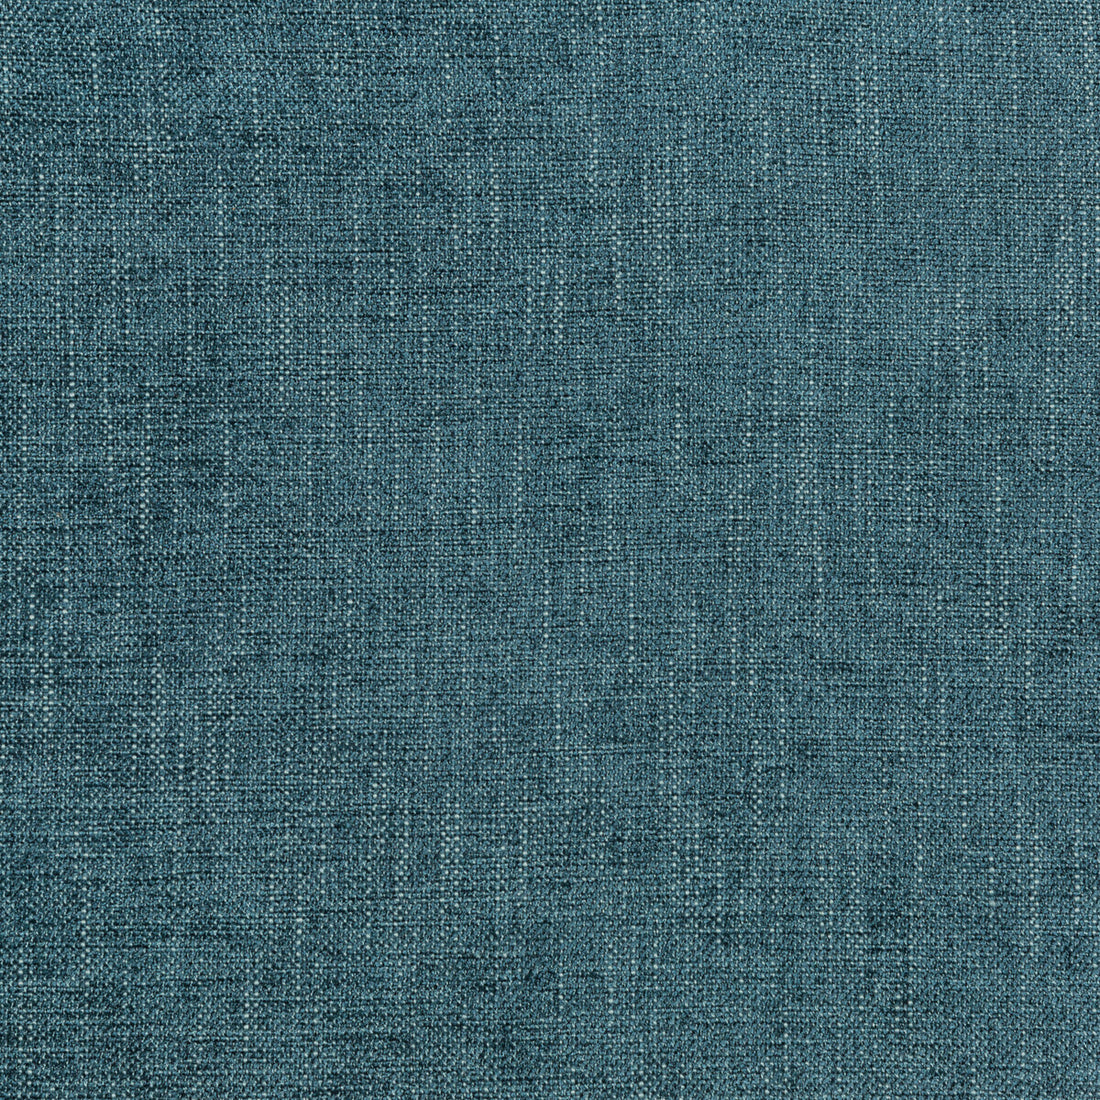 Kravet Smart fabric in 35973-35 color - pattern 35973.35.0 - by Kravet Smart in the Performance Crypton Home collection